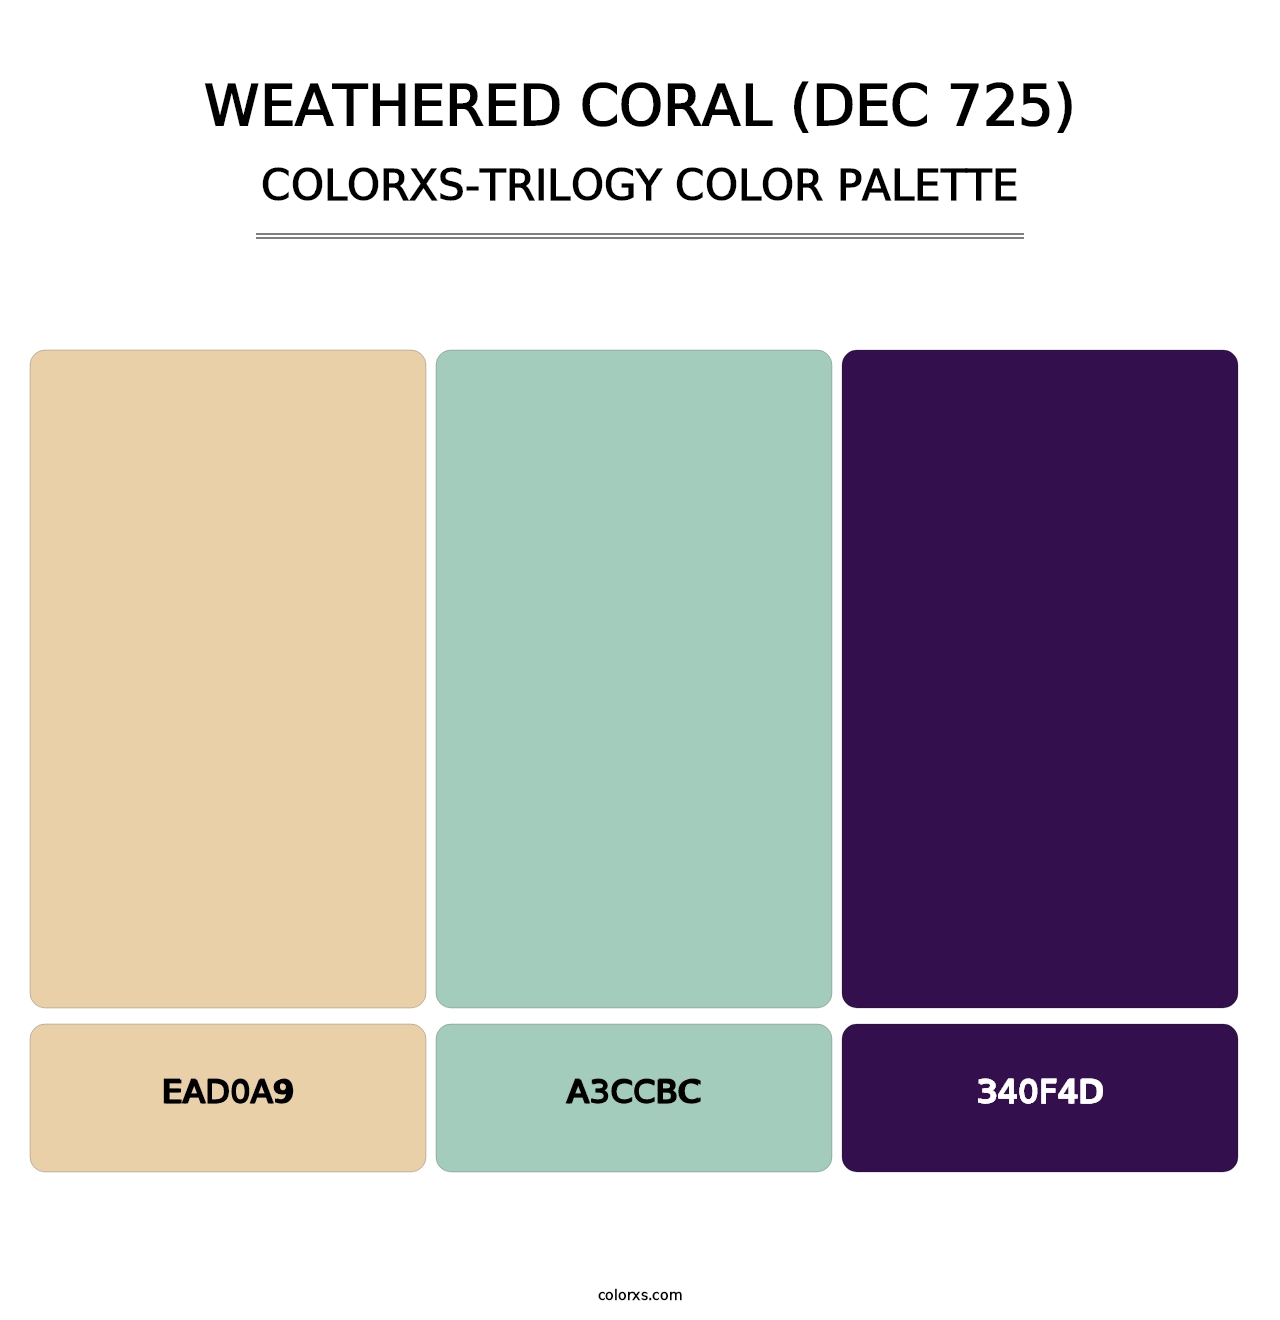 Weathered Coral (DEC 725) - Colorxs Trilogy Palette